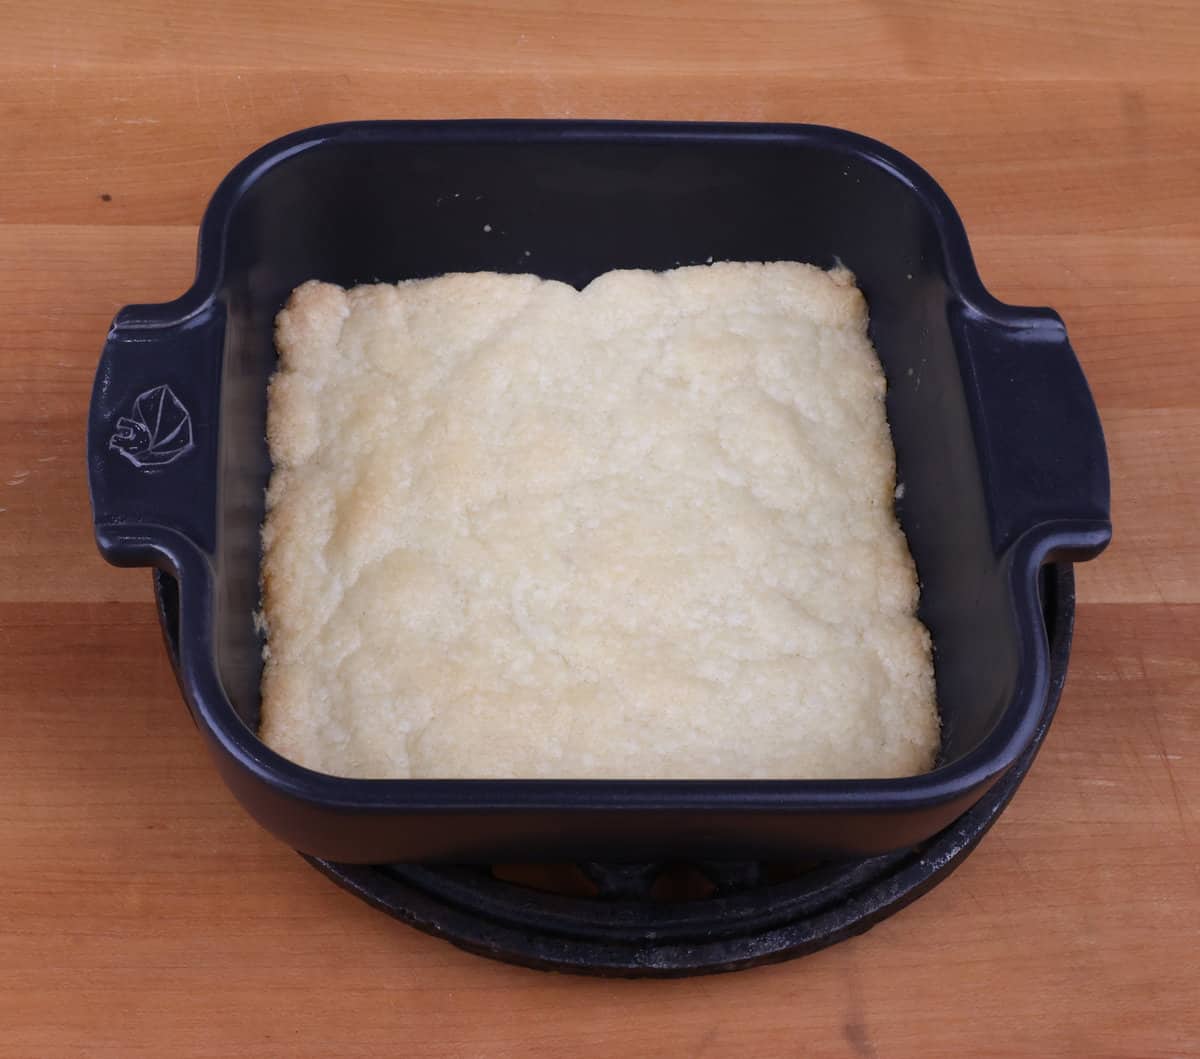 baked shortbread pie crust in a small black baking dish.